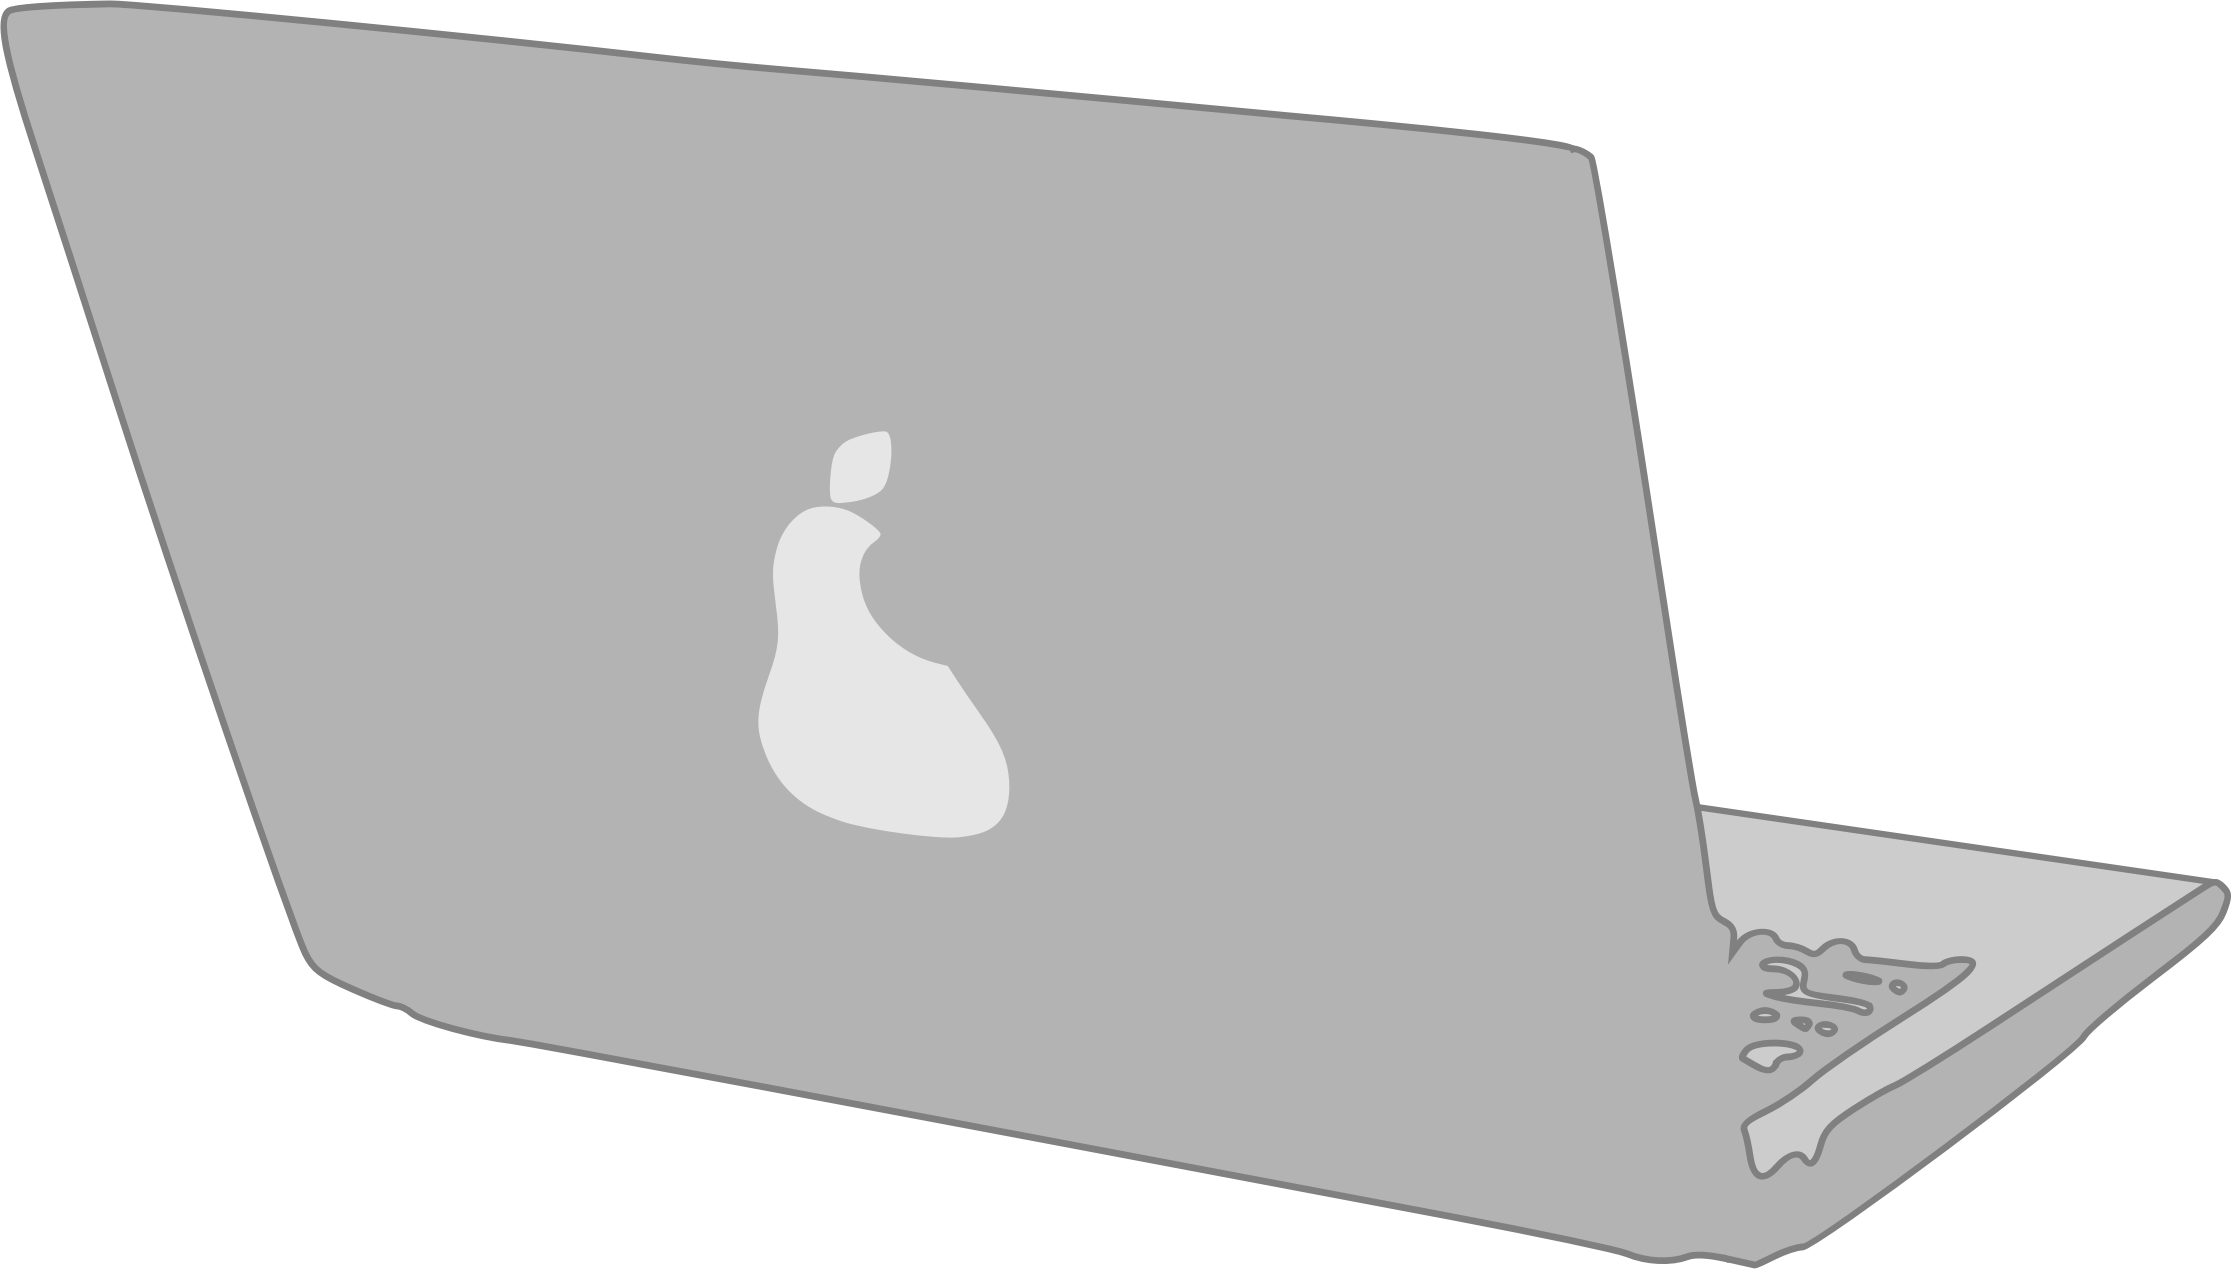 clipart of laptops - photo #23